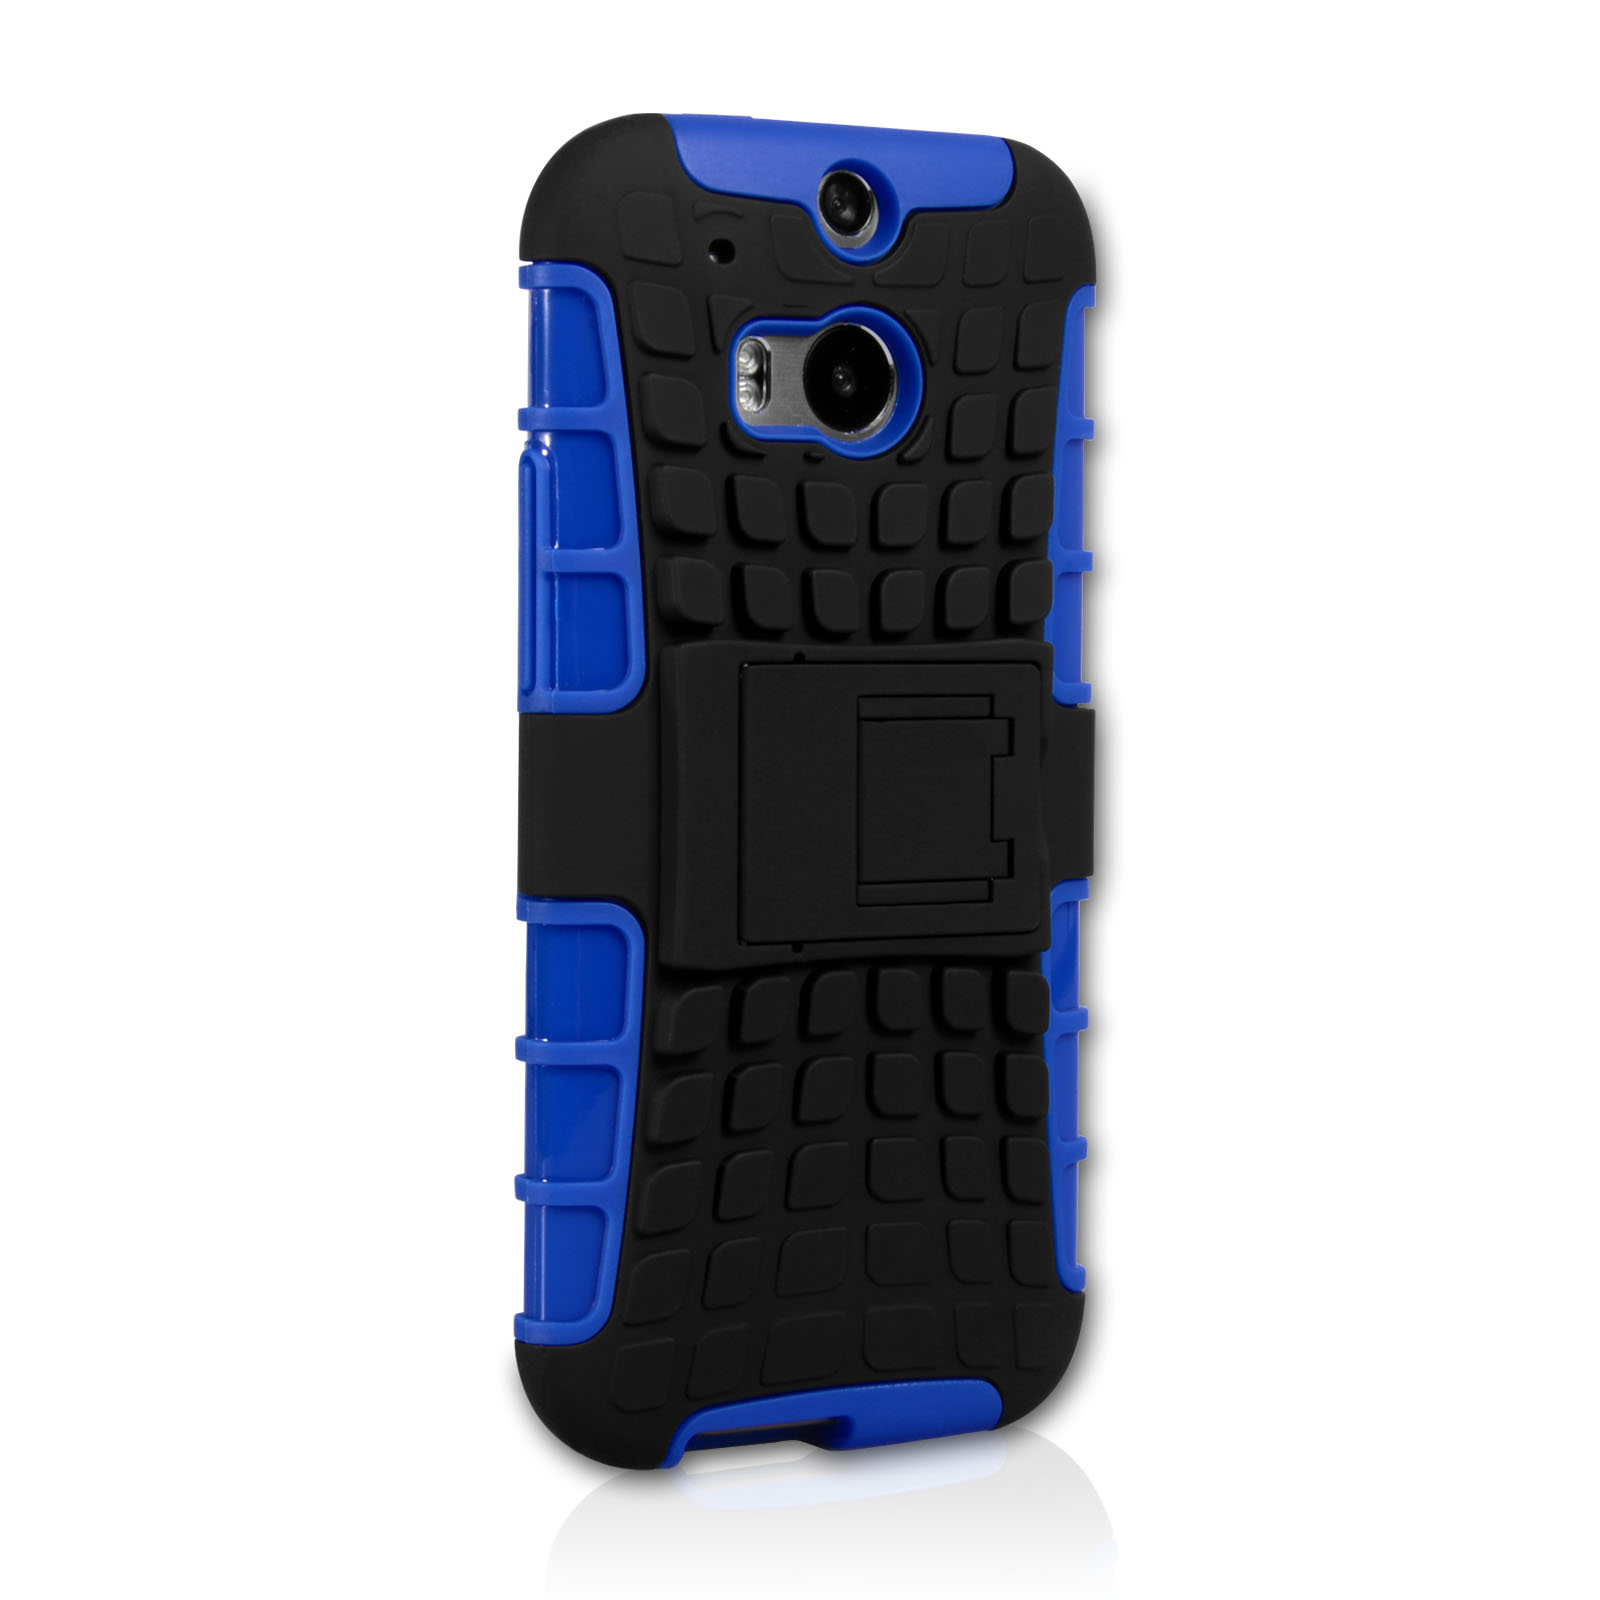 Yousave Accessories Htc One M8 Stand Combo Case Blue Black